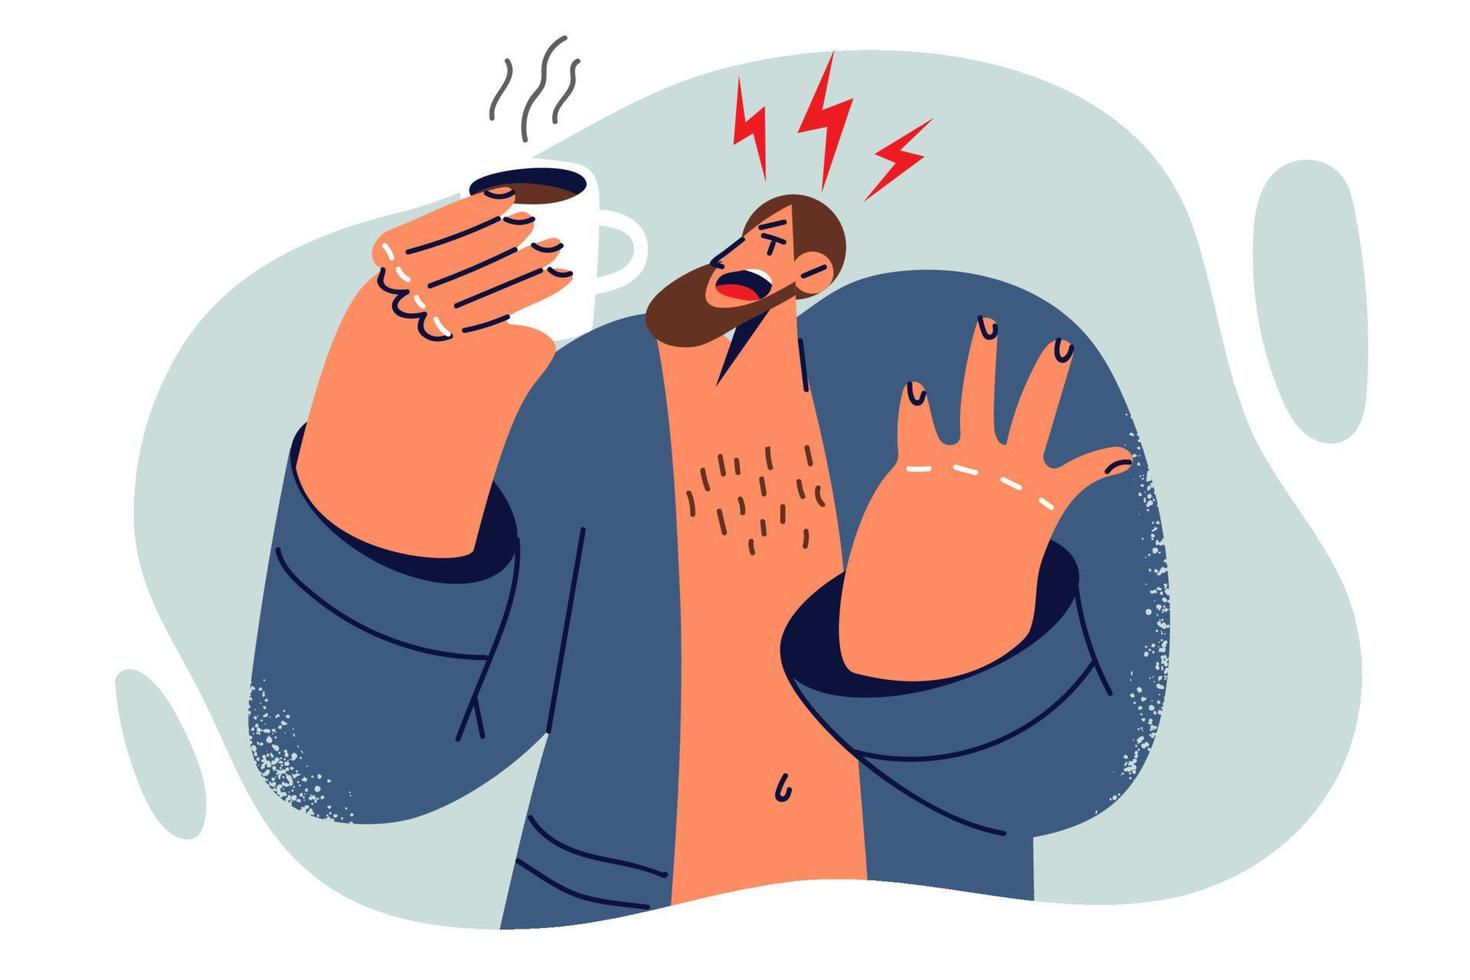 Nervous man screaming in pain after being burned by hot coffee during breakfast and yelling aggressively over ruined morning. Guy got burned, wanting to cheer up and gain strength before going to work vector